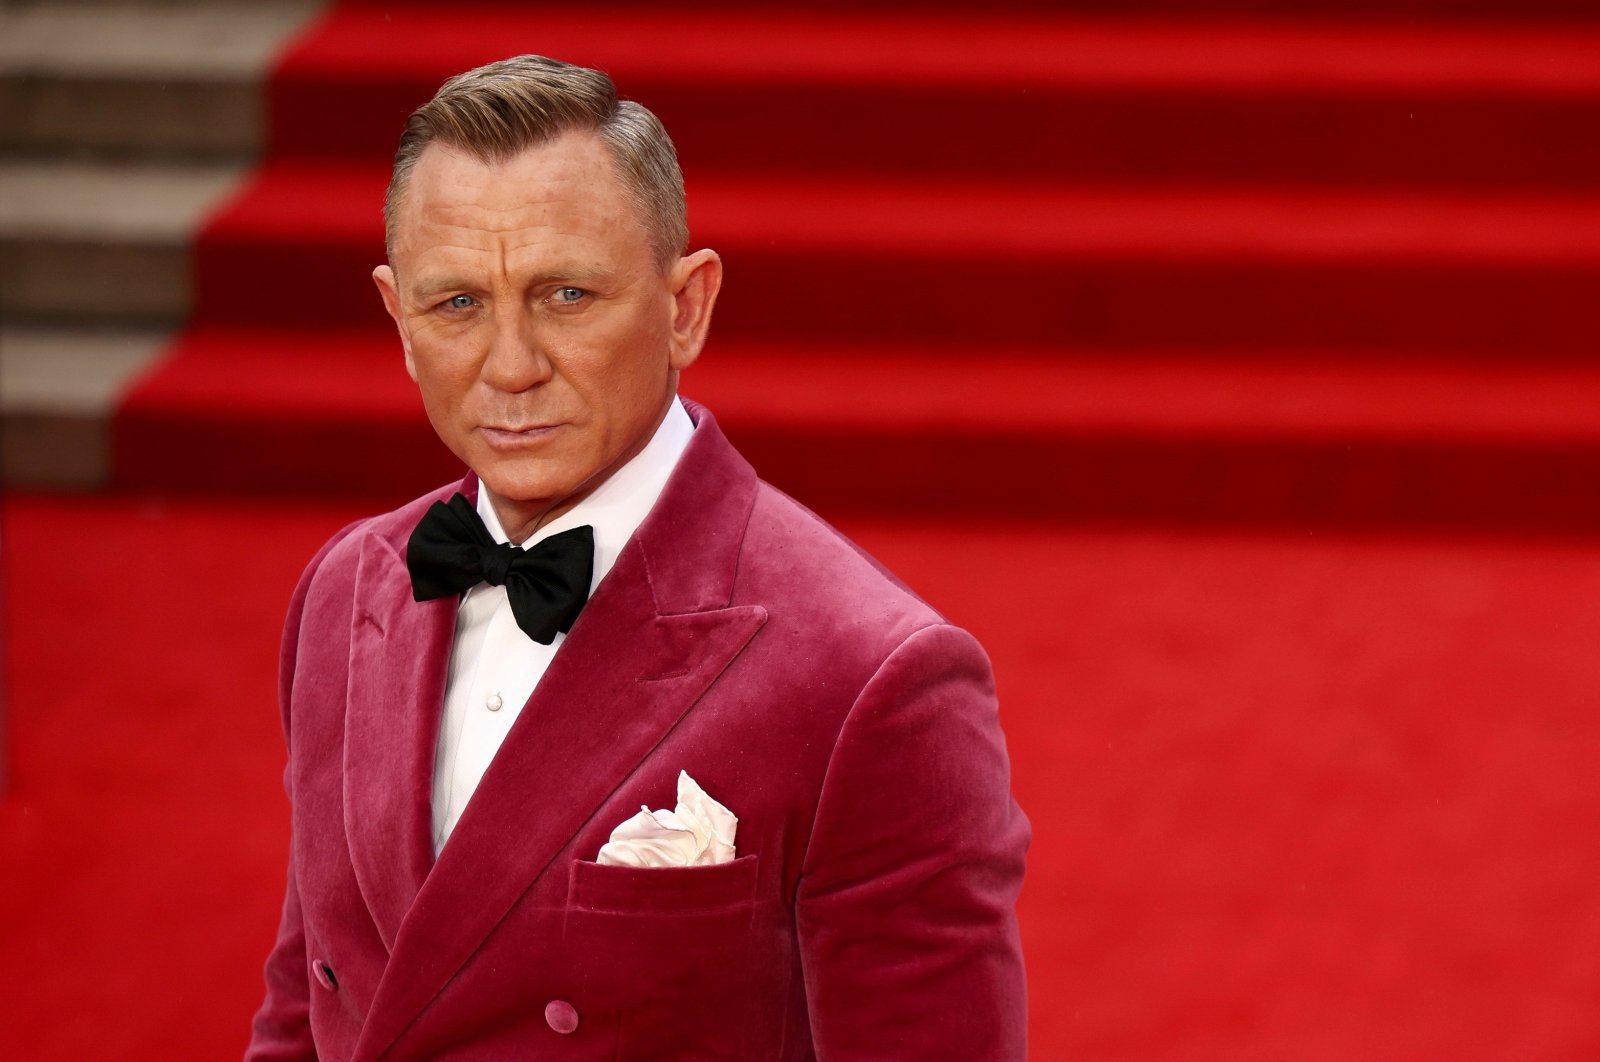 Actor Daniel Craig poses as he arrives at the world premiere of the new James Bond film "No Time To Die" at the Royal Albert Hall in London, U.K., Sept. 28, 2021. (Reuters Photo)